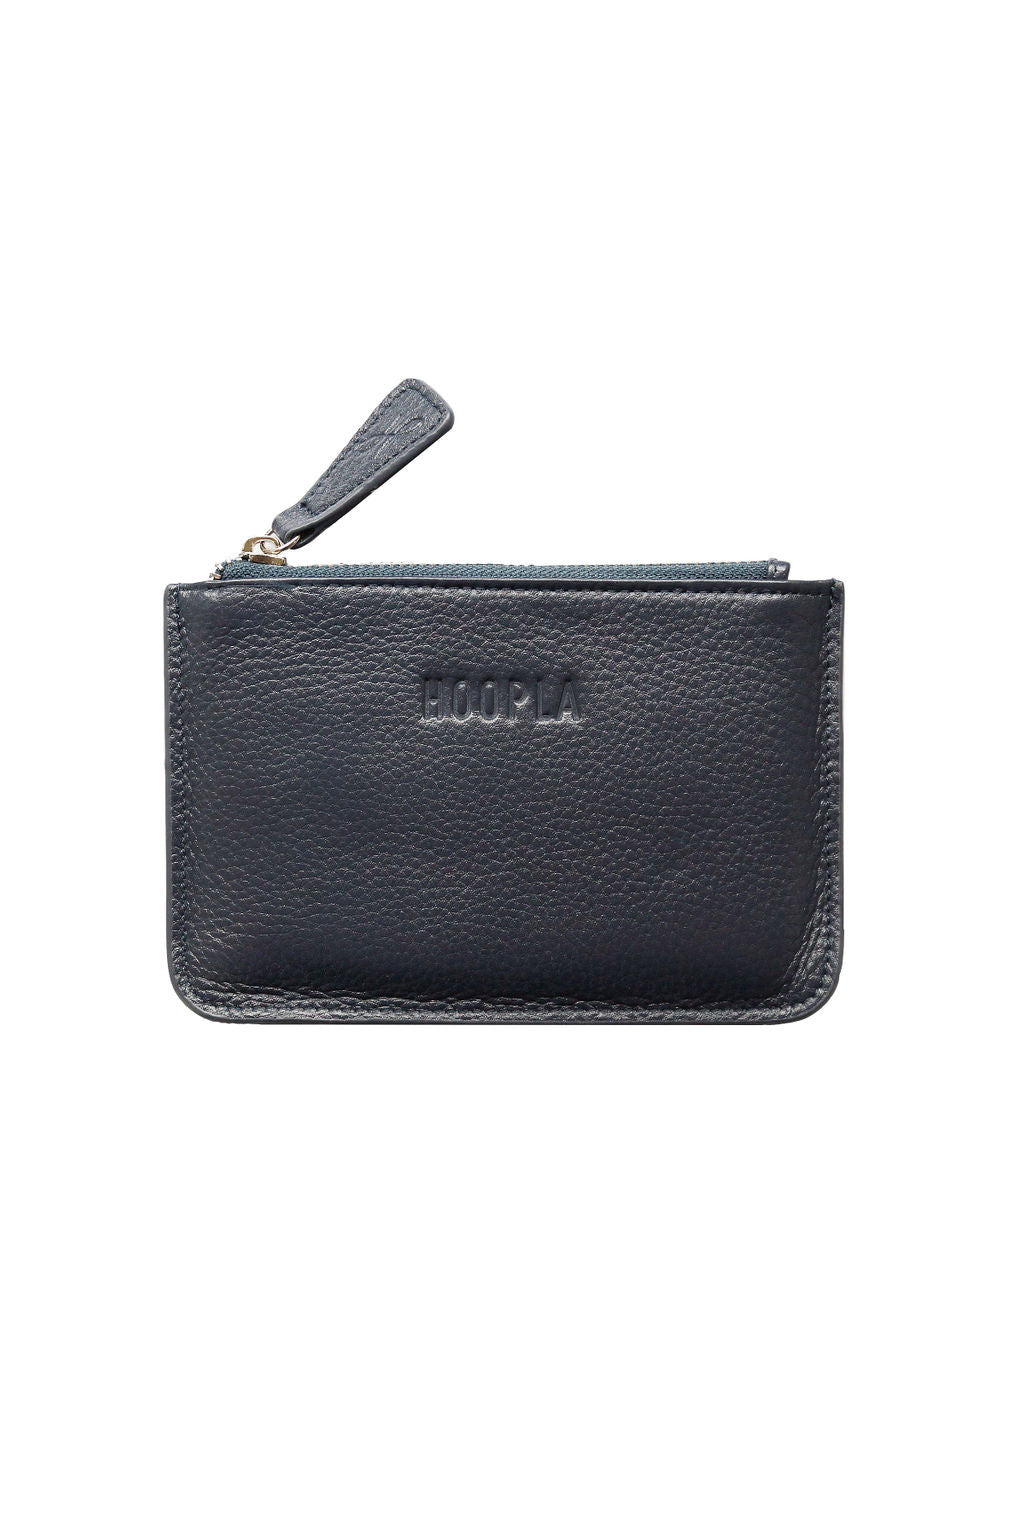 Front view of small coin and card pebbled leather navy Hoopla purse. With silver zip and leather zip tag. 